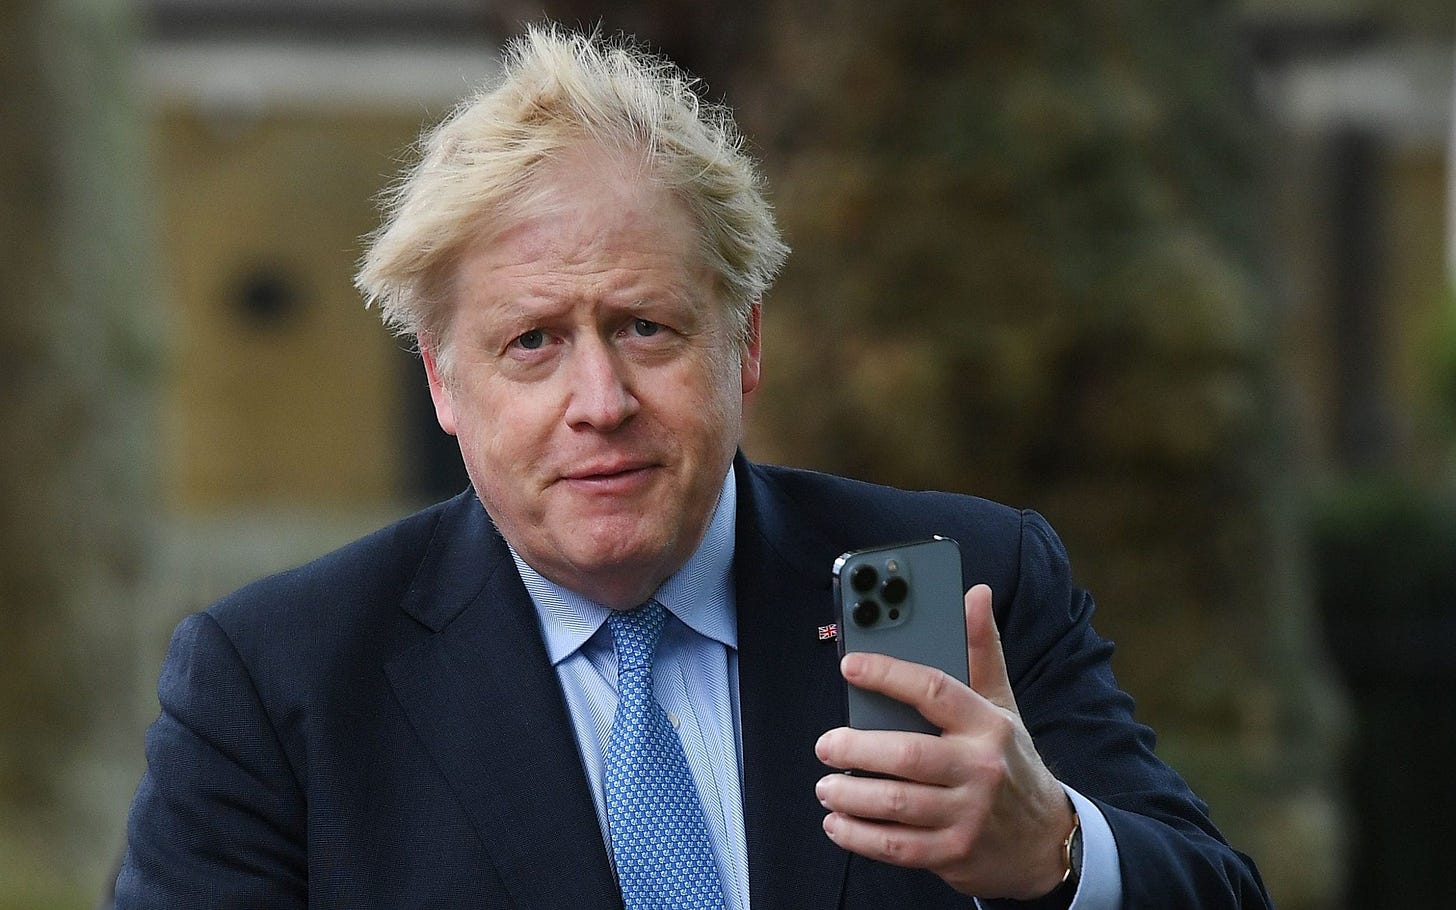 Covid inquiry demands to see Boris Johnson's unredacted WhatsApp messages